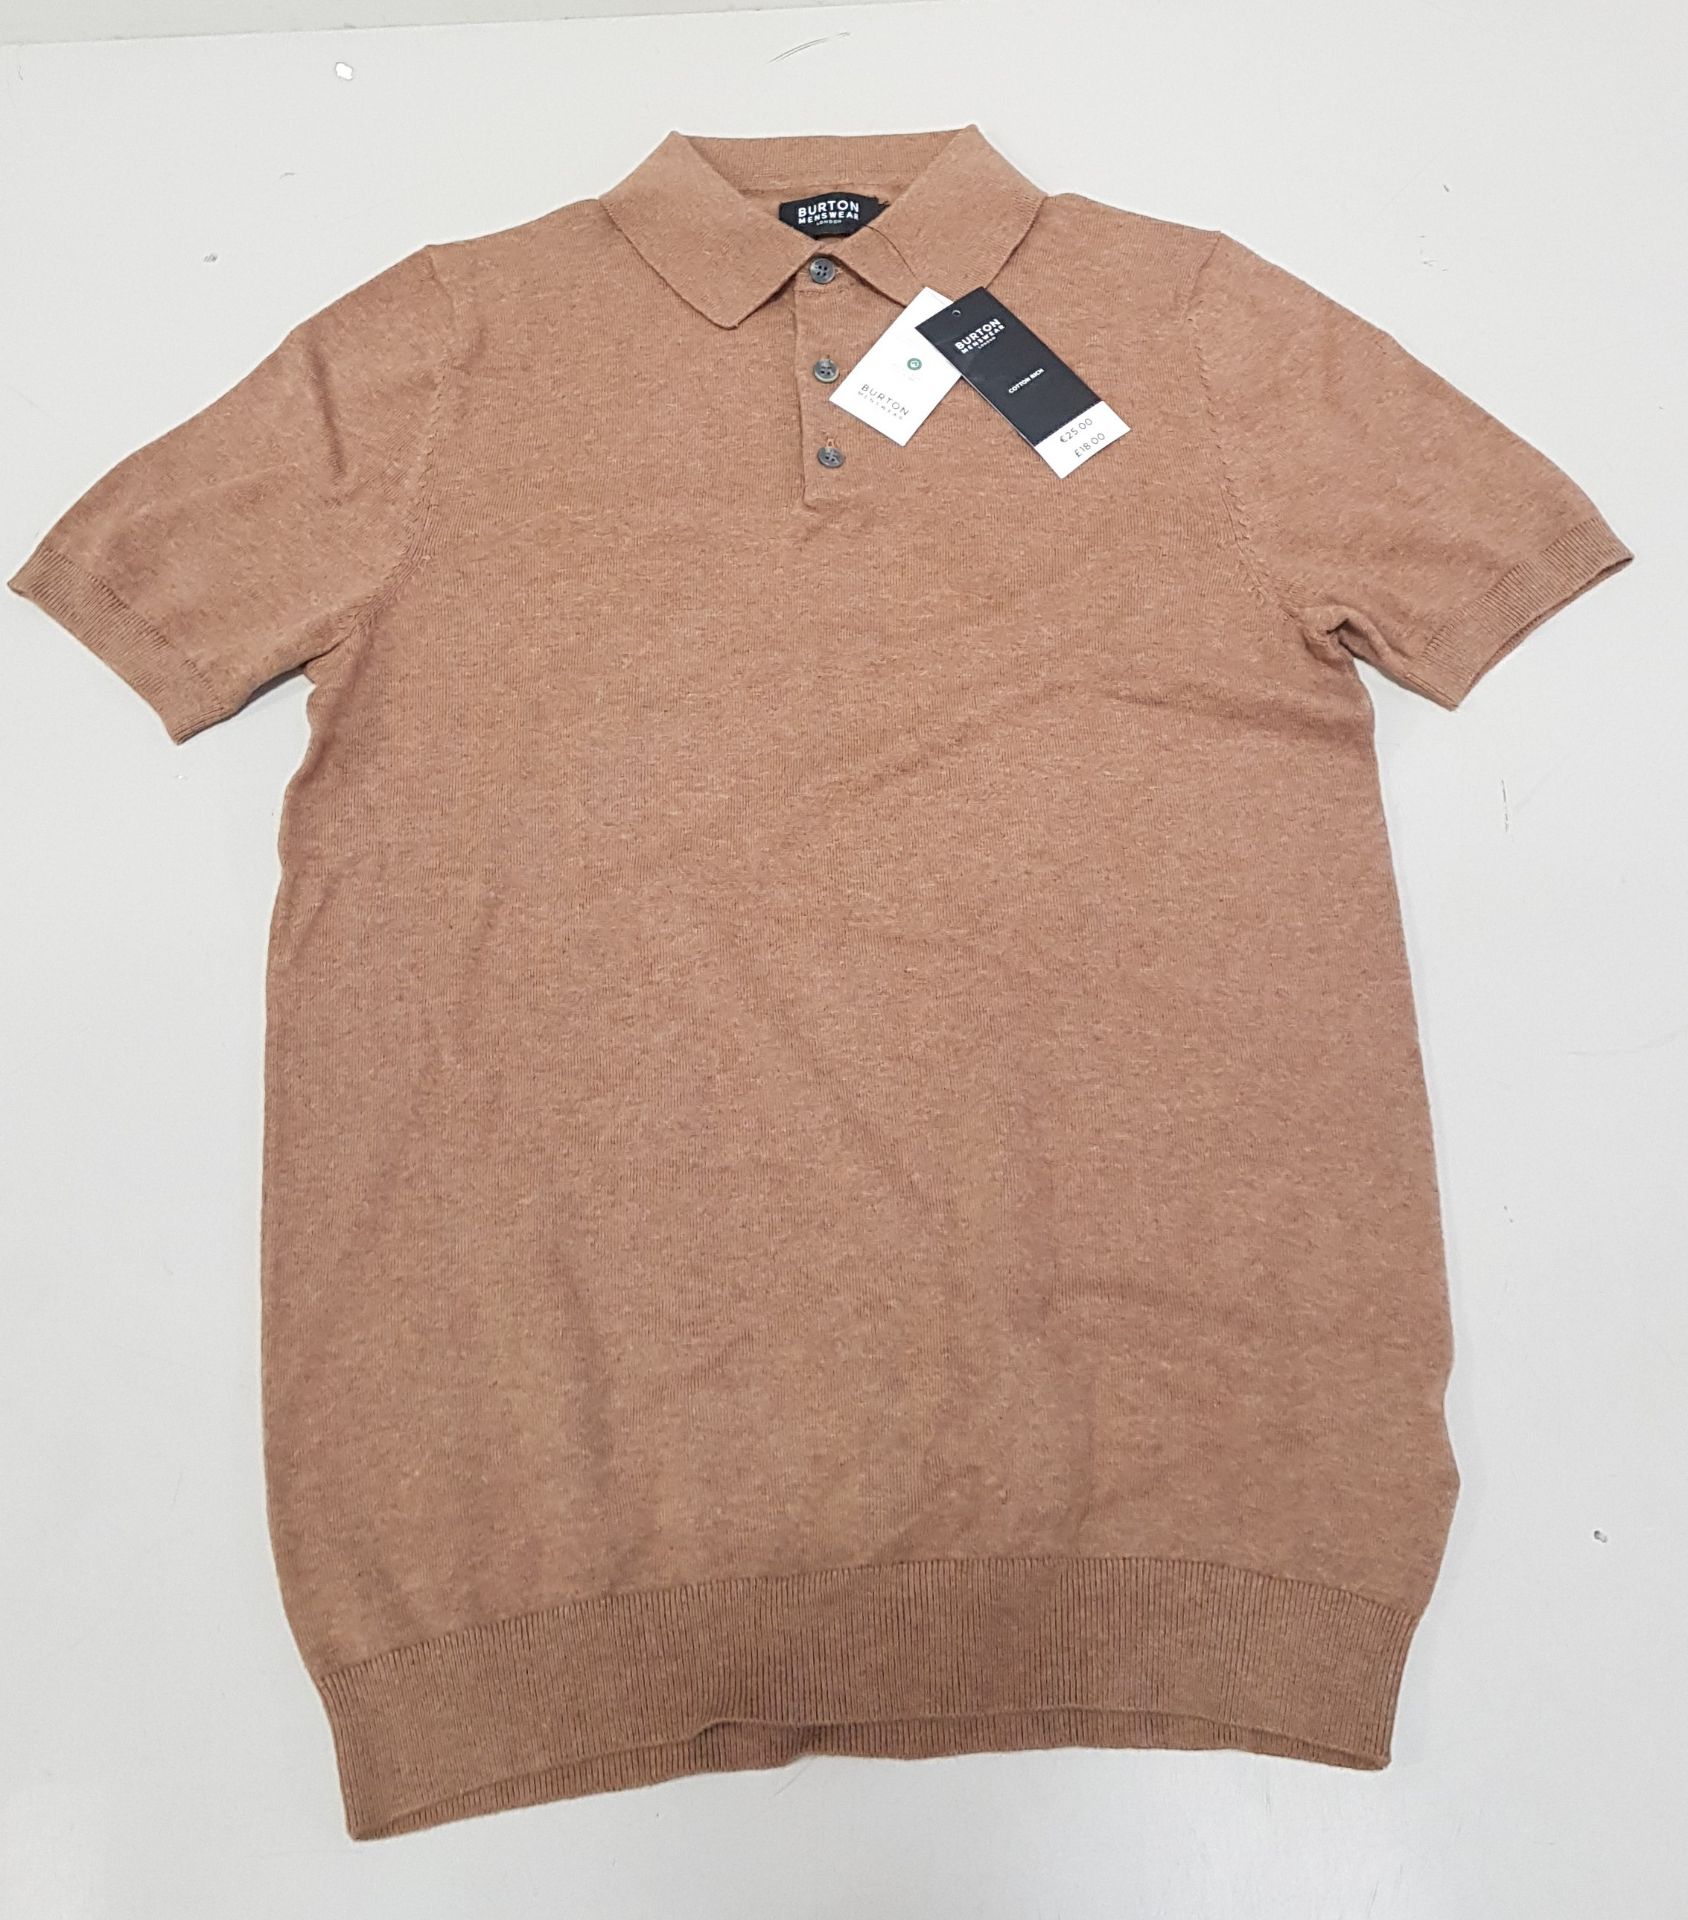 20 X BRAND NEW BURTON MENSWEAR BROWN BUTTONED SHIRTS SIZE SMALL RRP £18.00 ( TOTAL RRP £ 360.00 )